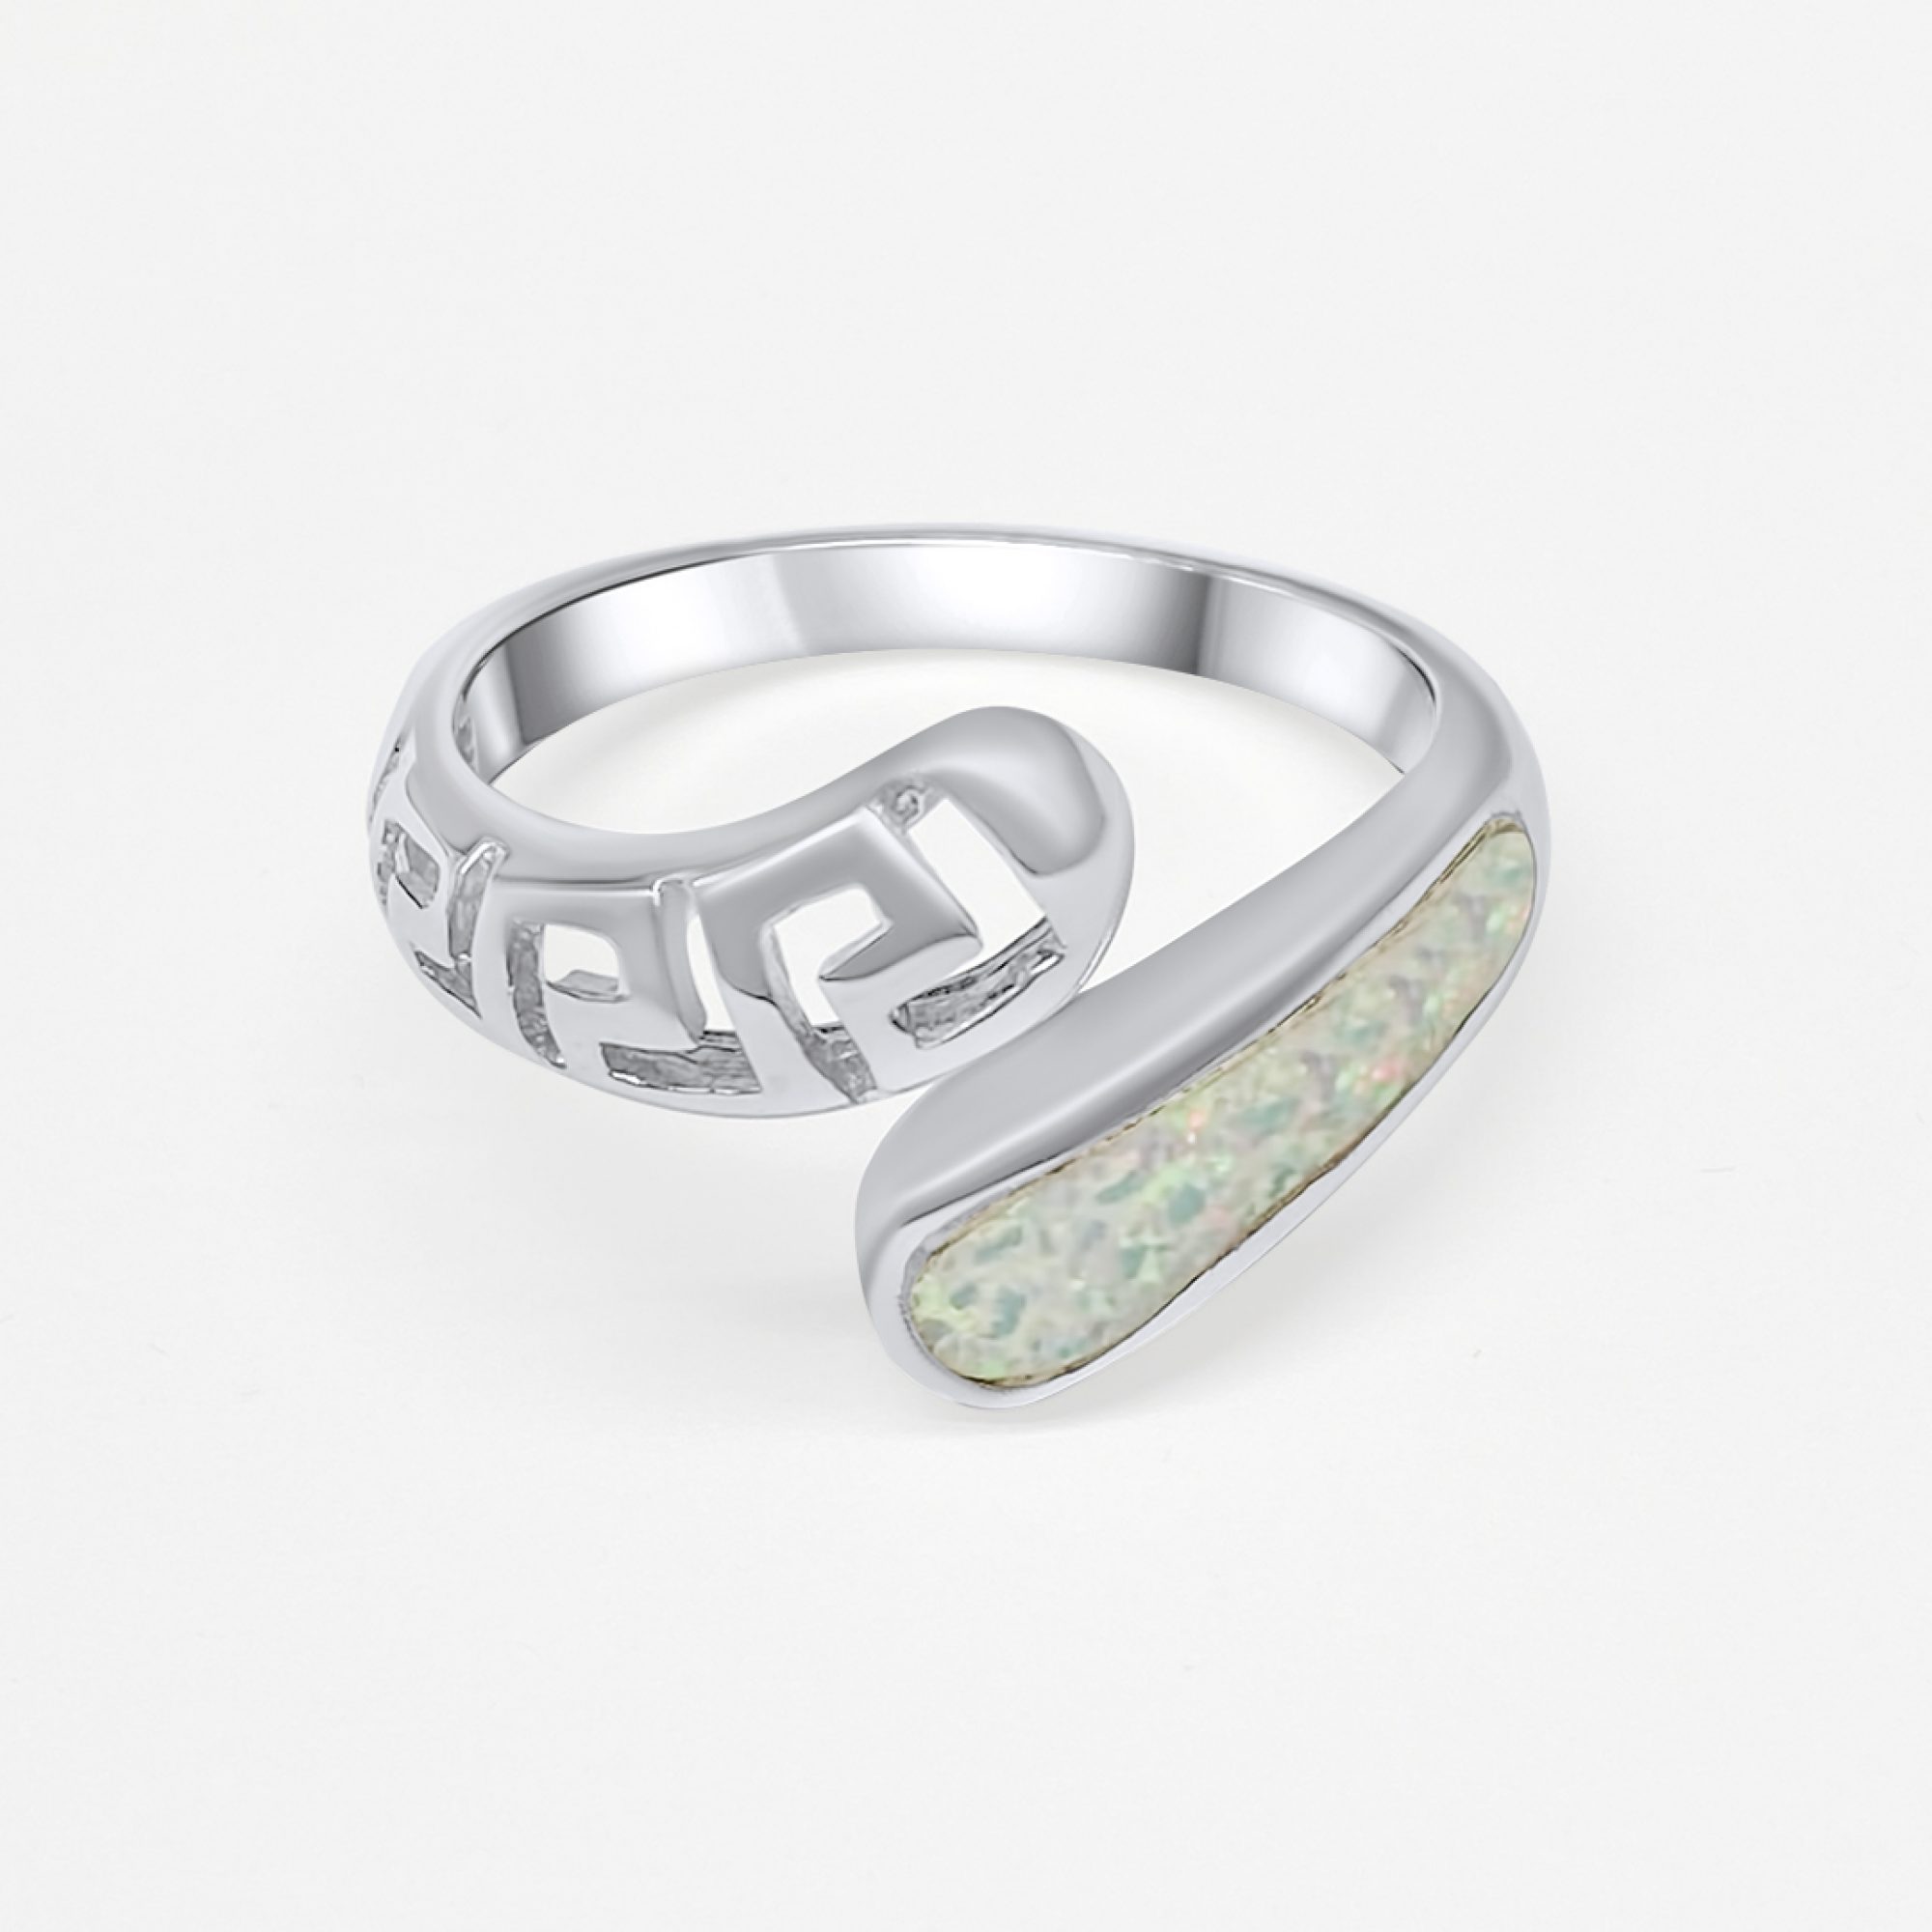 Silver ring with white opal and meander